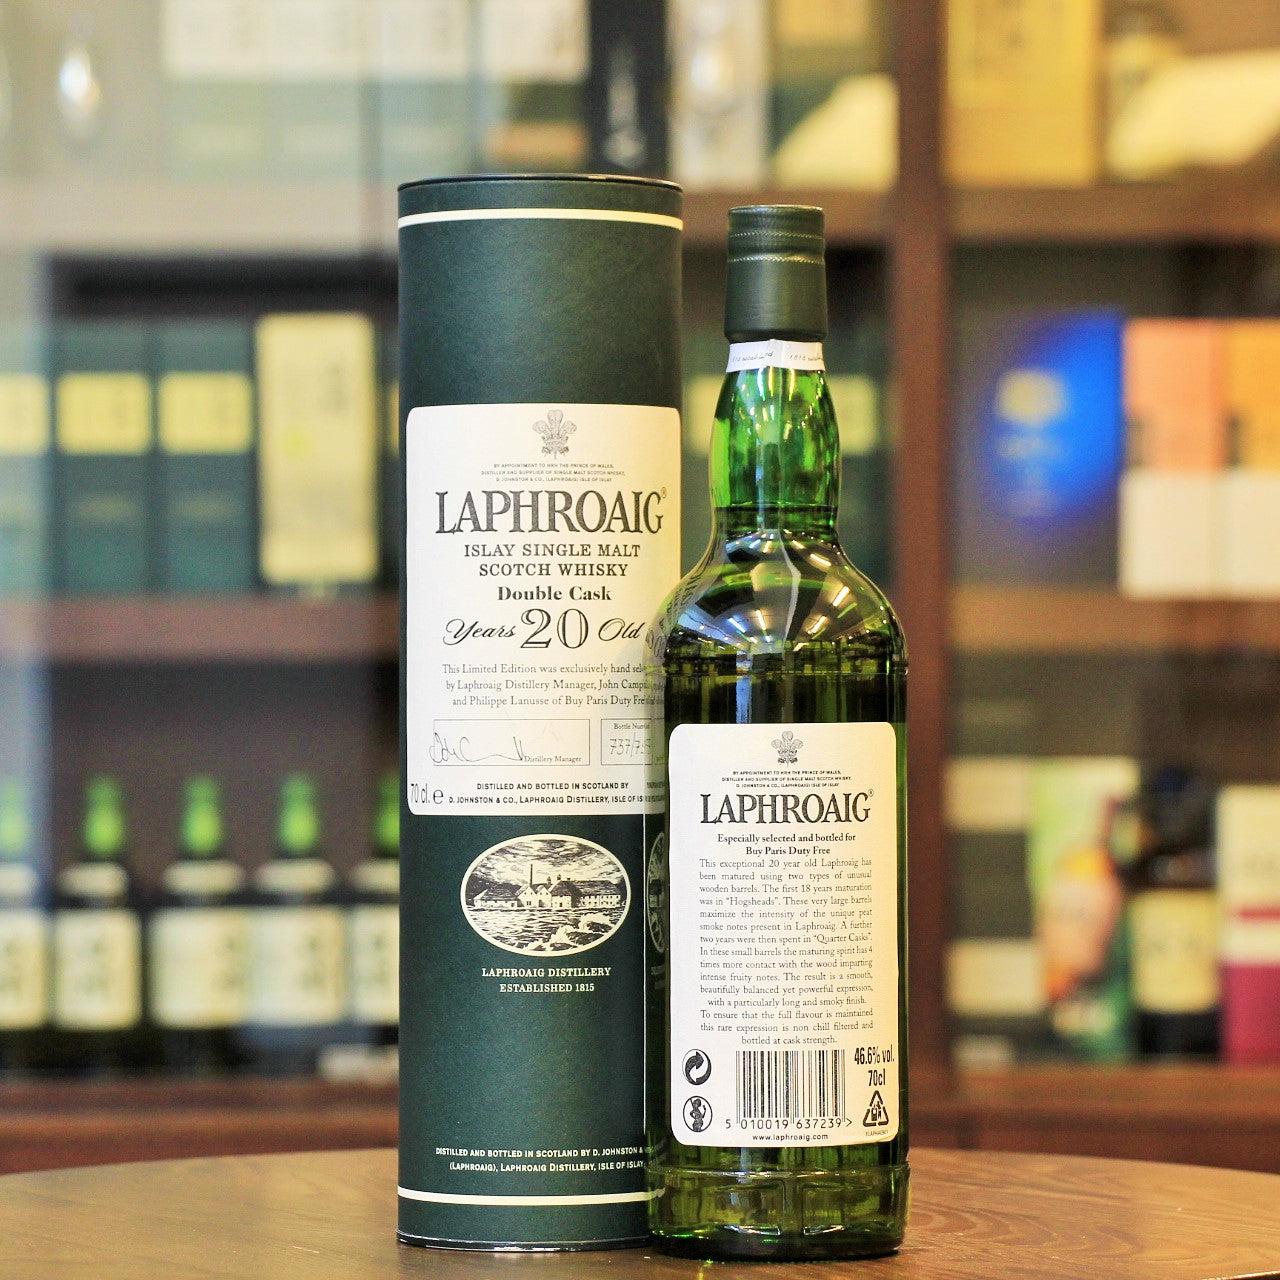 A 2010 limited edition release of 750 bottles by Laphroaig for Paris Duty Free. Matured in a Hogshead barrel for about 18 years before a Quarter Cask finish lasting for an additional 2 years, this was a selection by the Laphroaig Distillery Manager, John Campbell and Philippe Lanusse of Paris Duty Free. Rated 90+ on Whiskybase across 21 votes. 